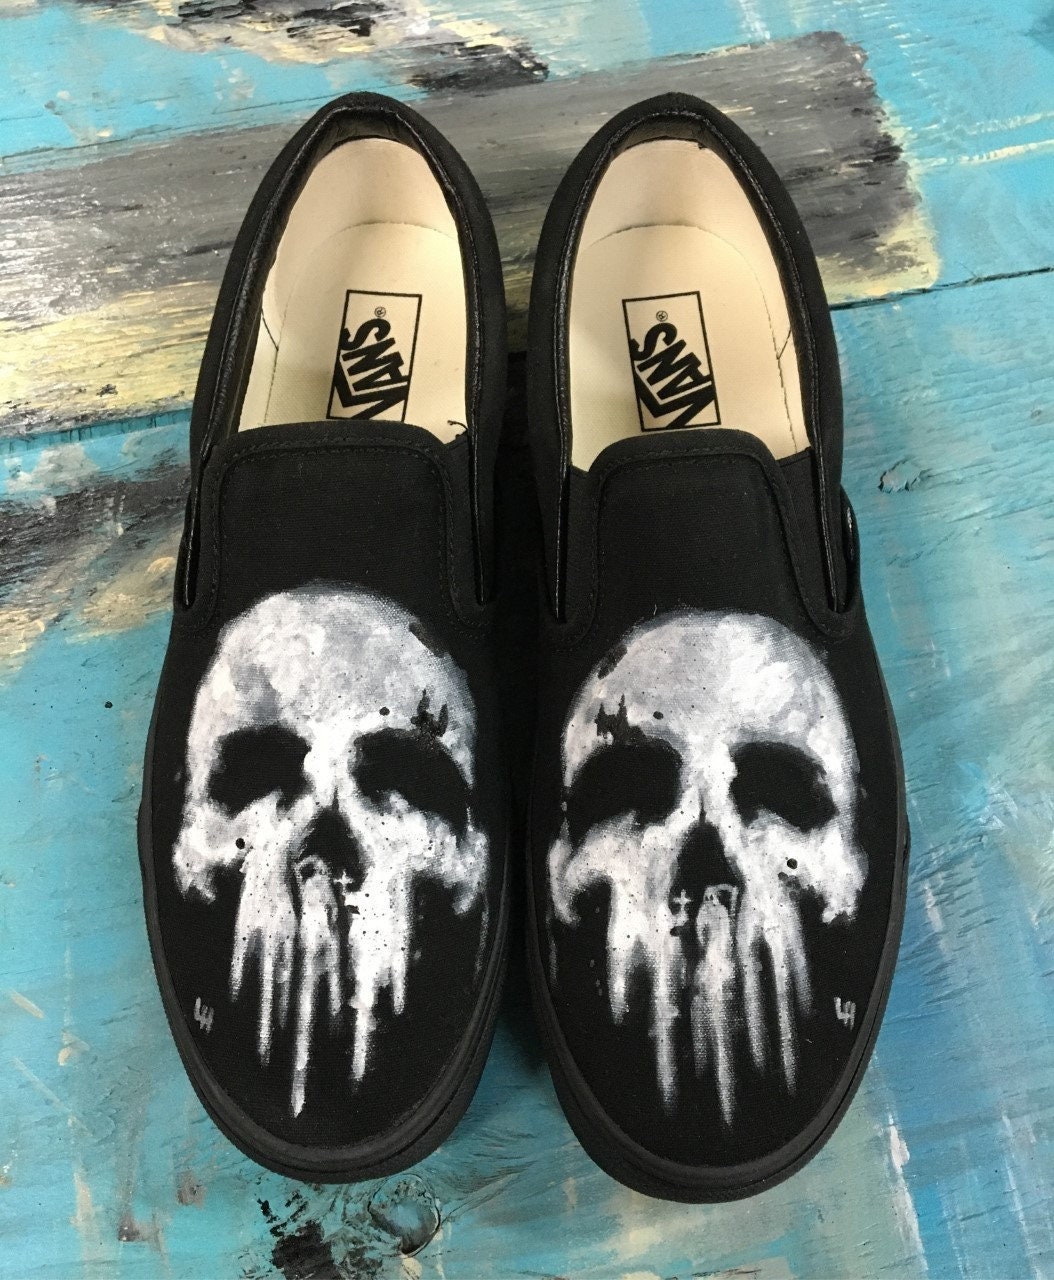 Hand Painted Skulls on a Pair of Vans Slip on Shoes Size 11 US - Etsy